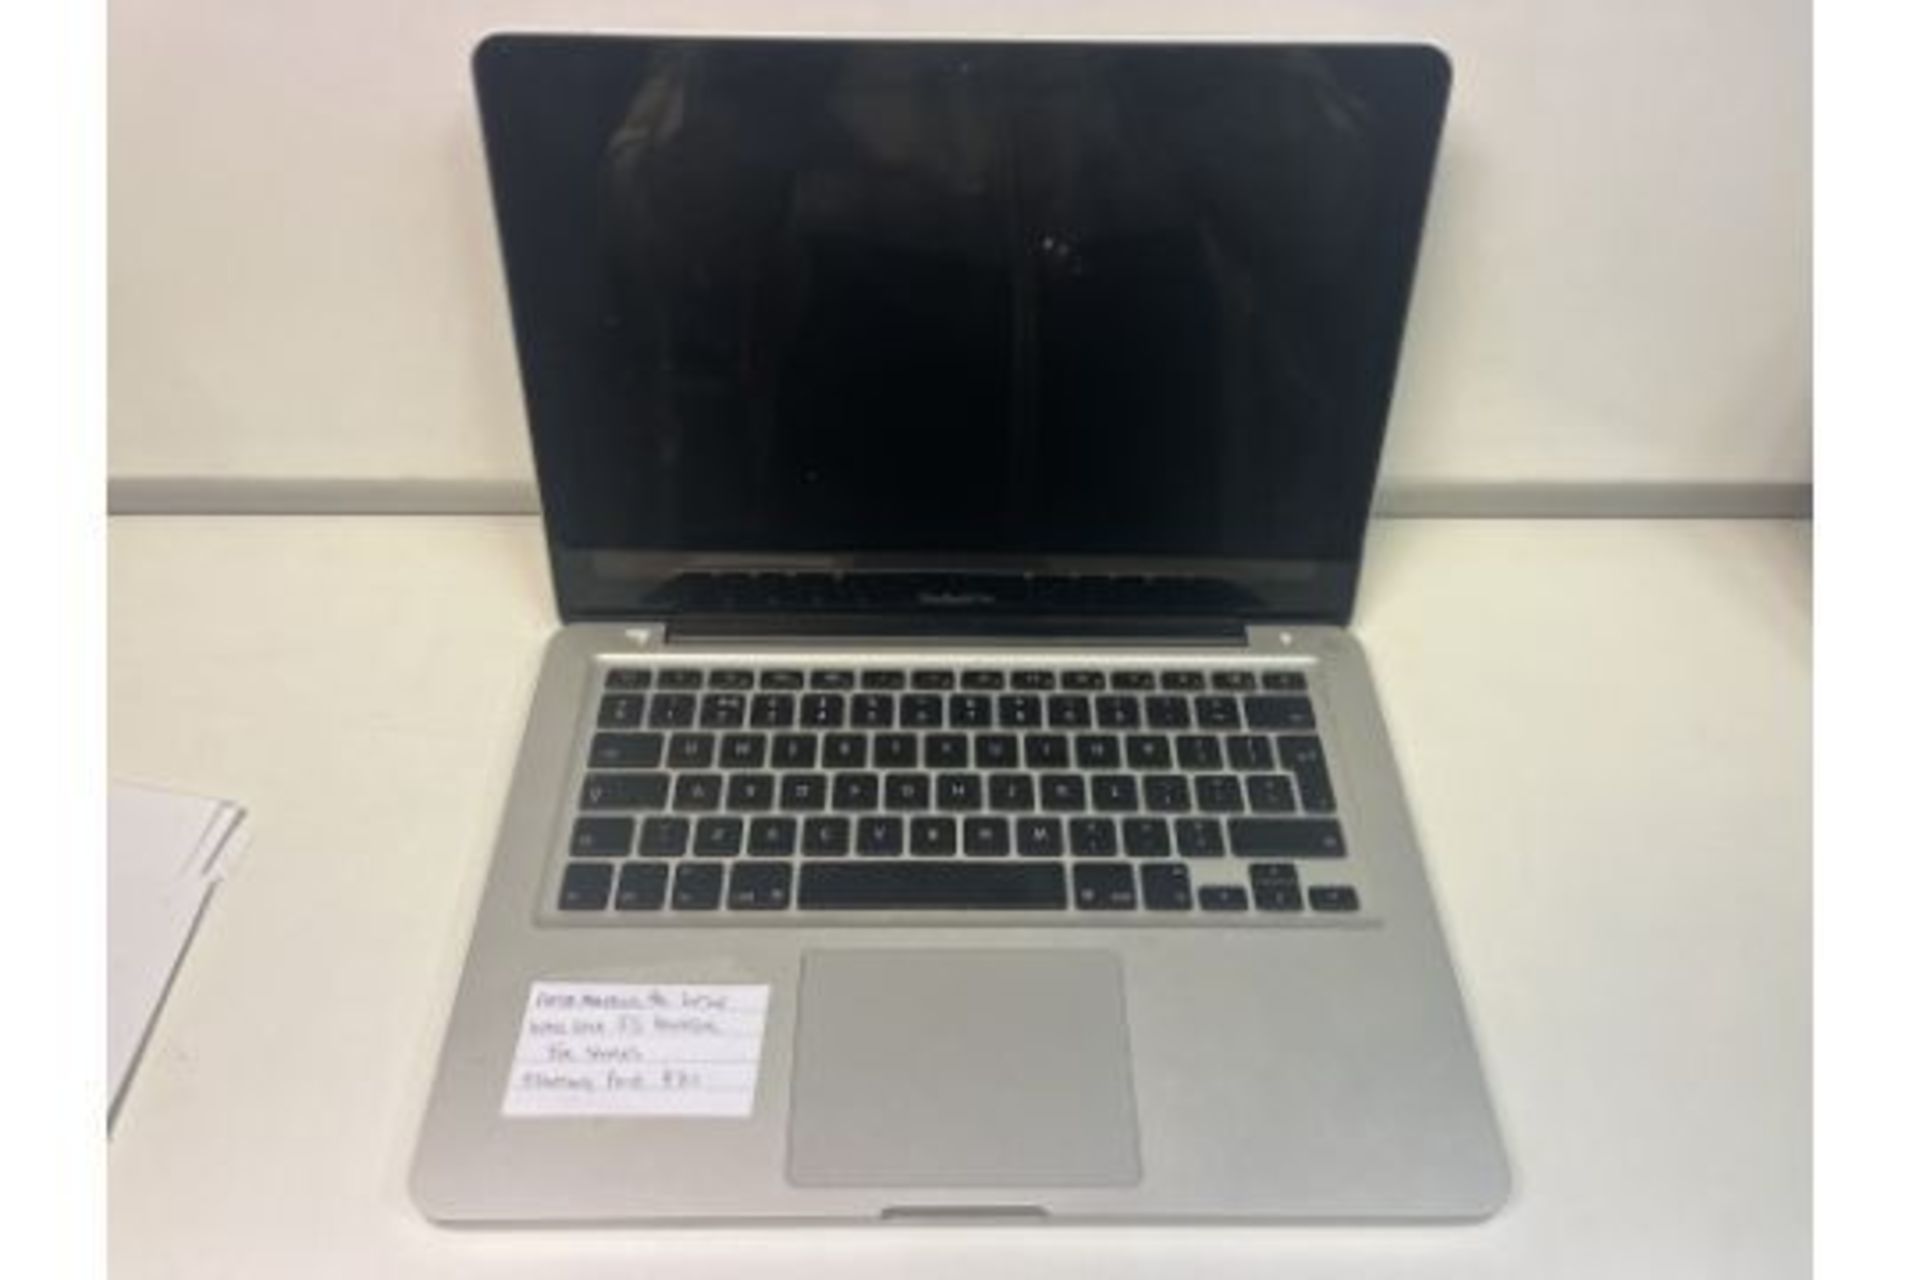 APPLE MACBOOK PRO LAPTOP, INTEL CORE i5 PROCESSOR (FOR SPARES AND REPAIRS) (15) 174